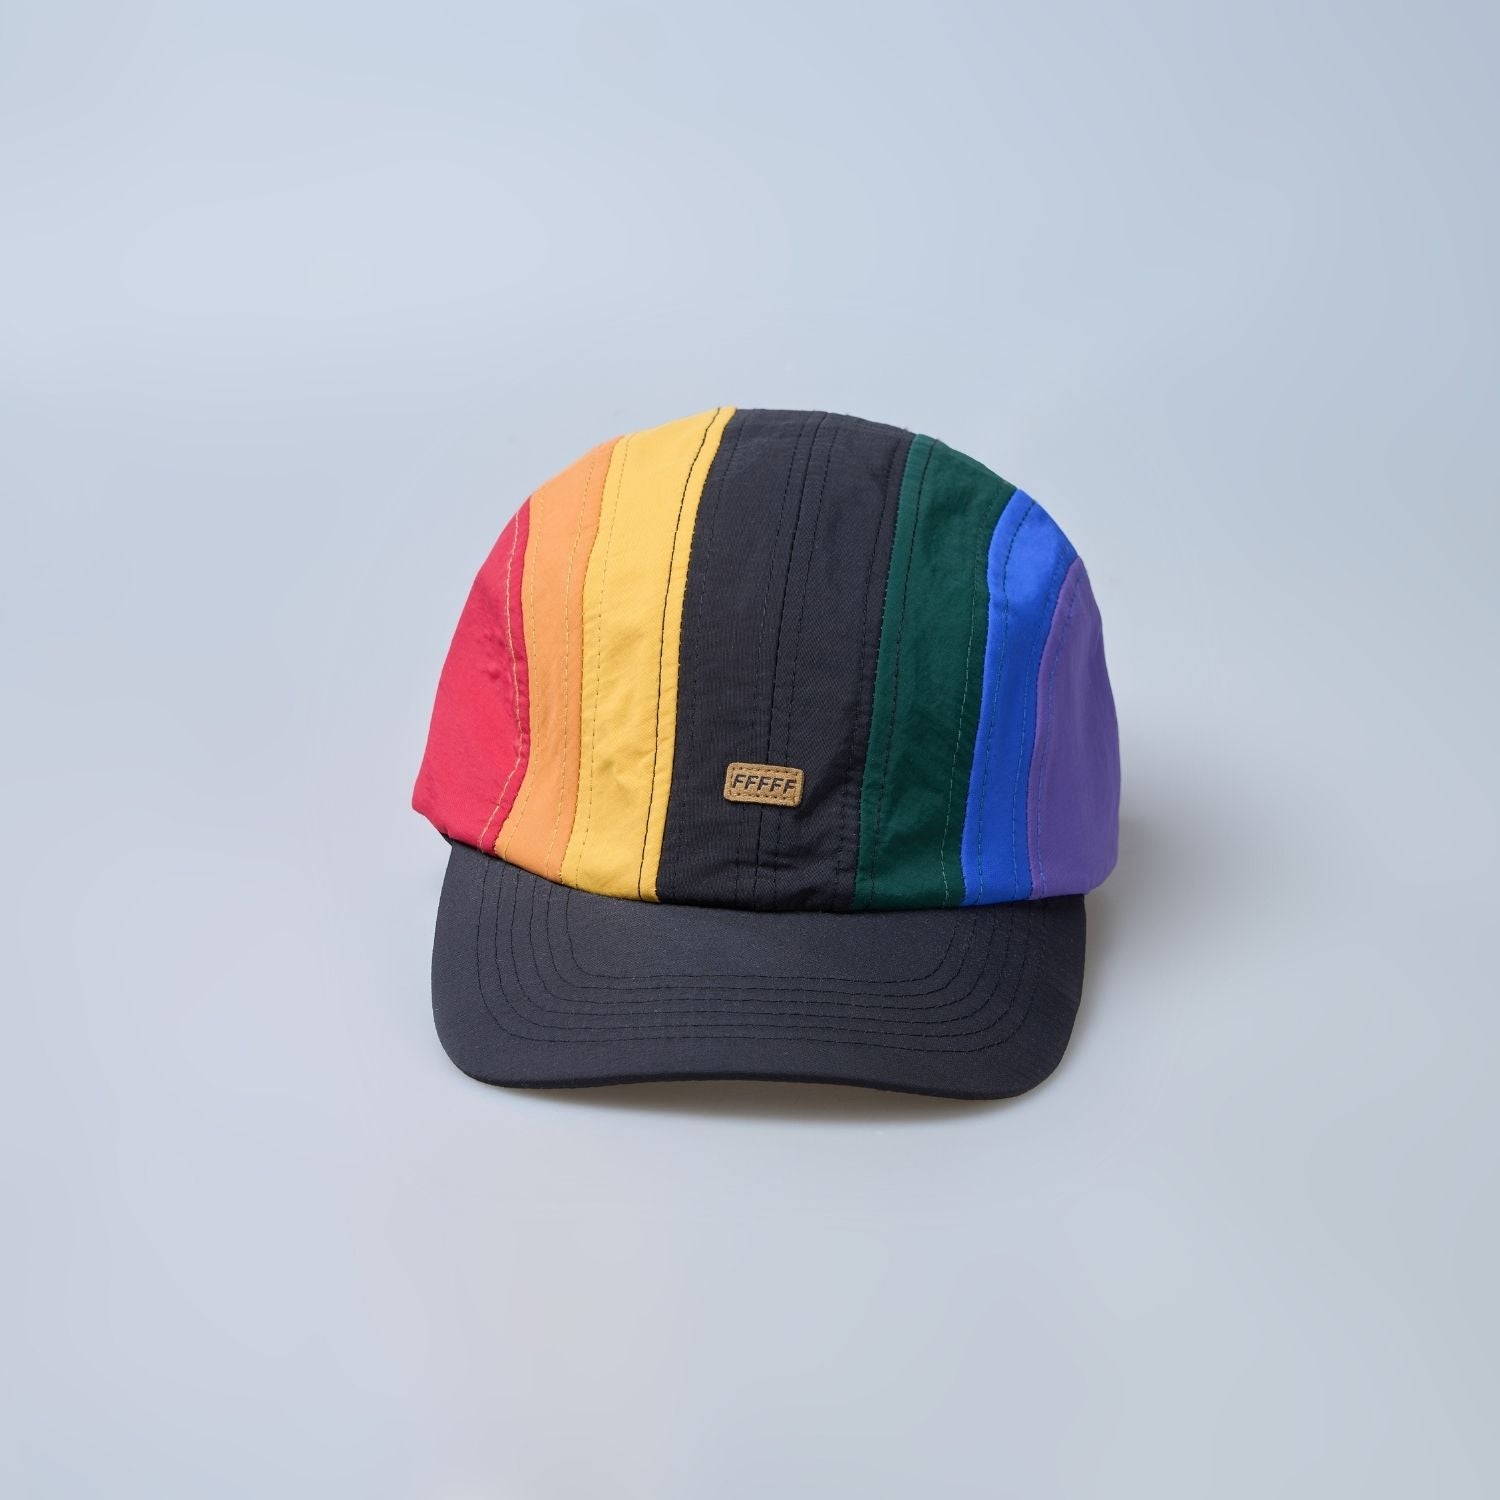 Multi colored, wide brim cap for men with adjustable strap, front view.